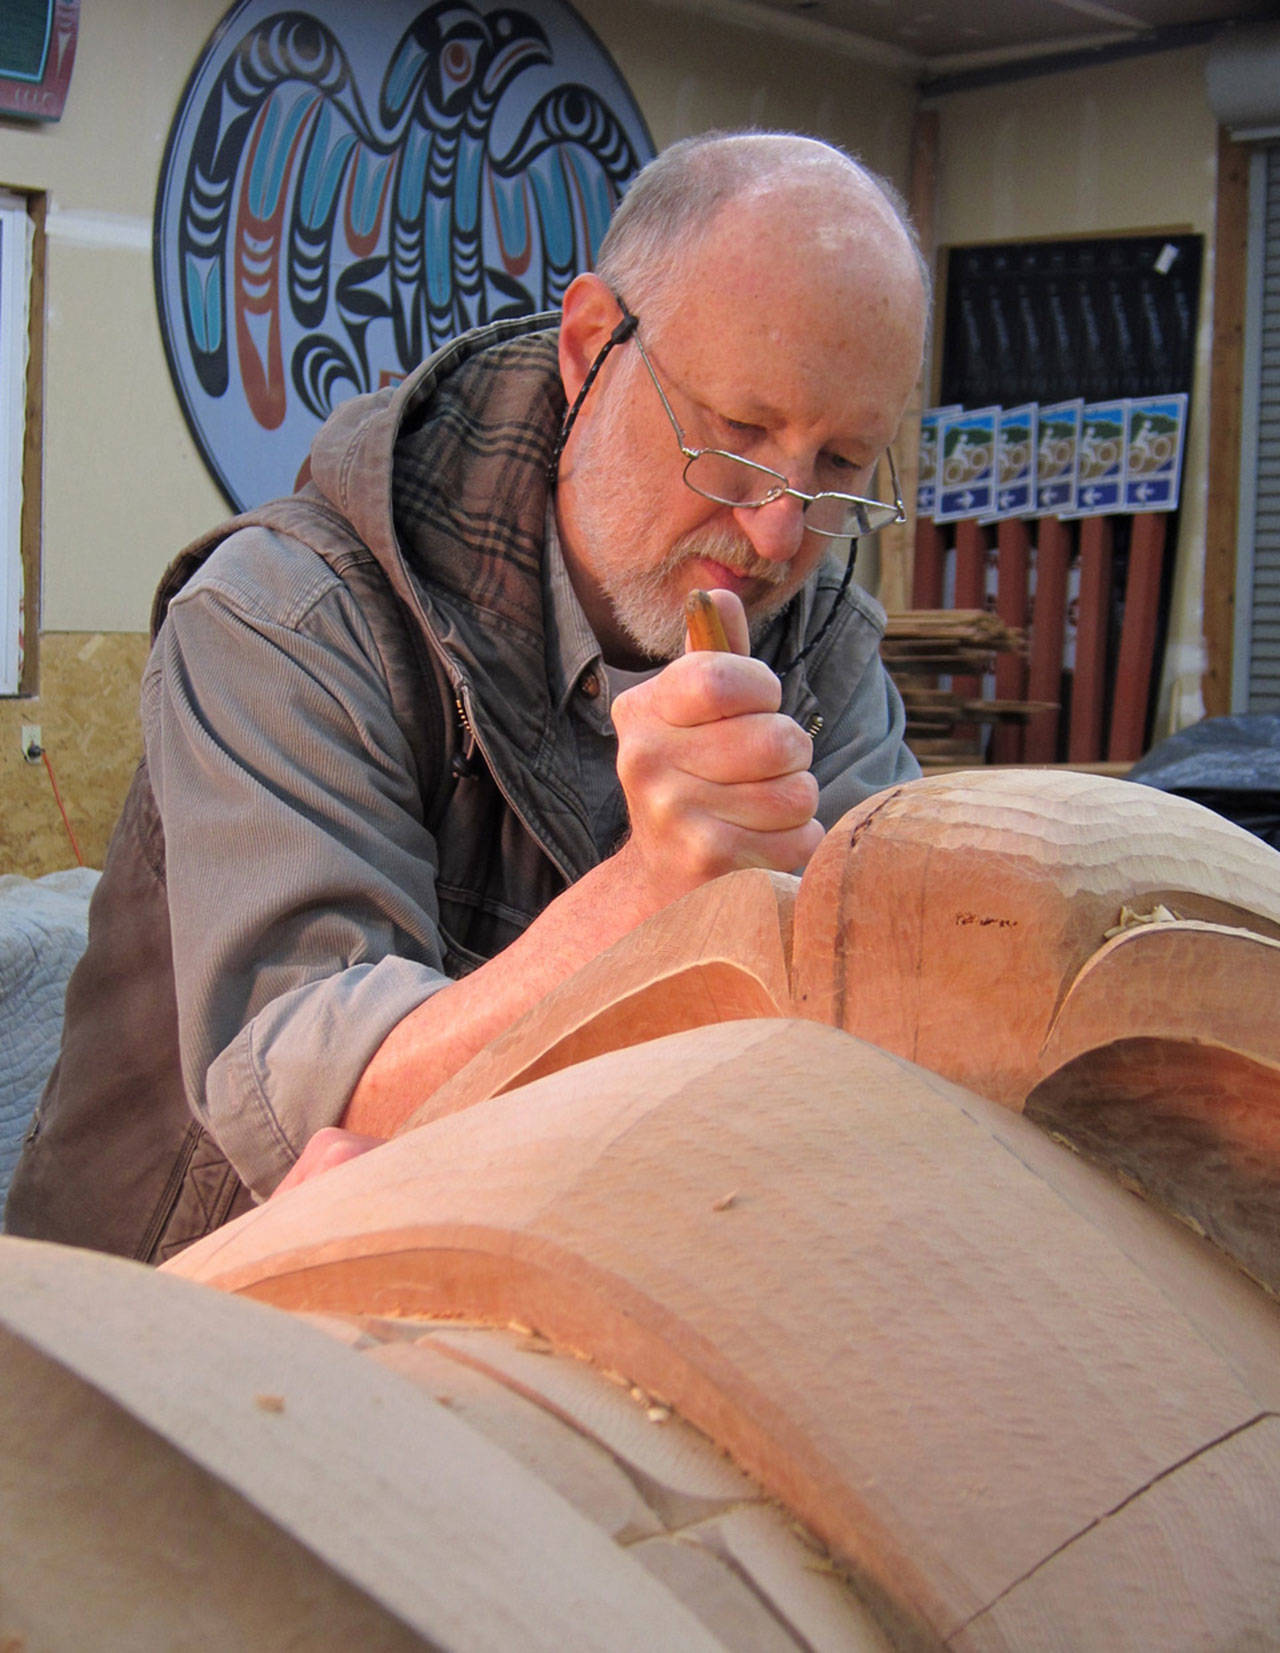 Artist Dale Faulstich has been commissioned by the Jamestown S’Klallam Tribe to carve a totem pole and a canoe as a gift to the Northwest Maritime Center. The art is expected to be completed in 2019. Faulstich has completed 66 totems in the North Olympic Peninsula area. (Dale Faulstich)